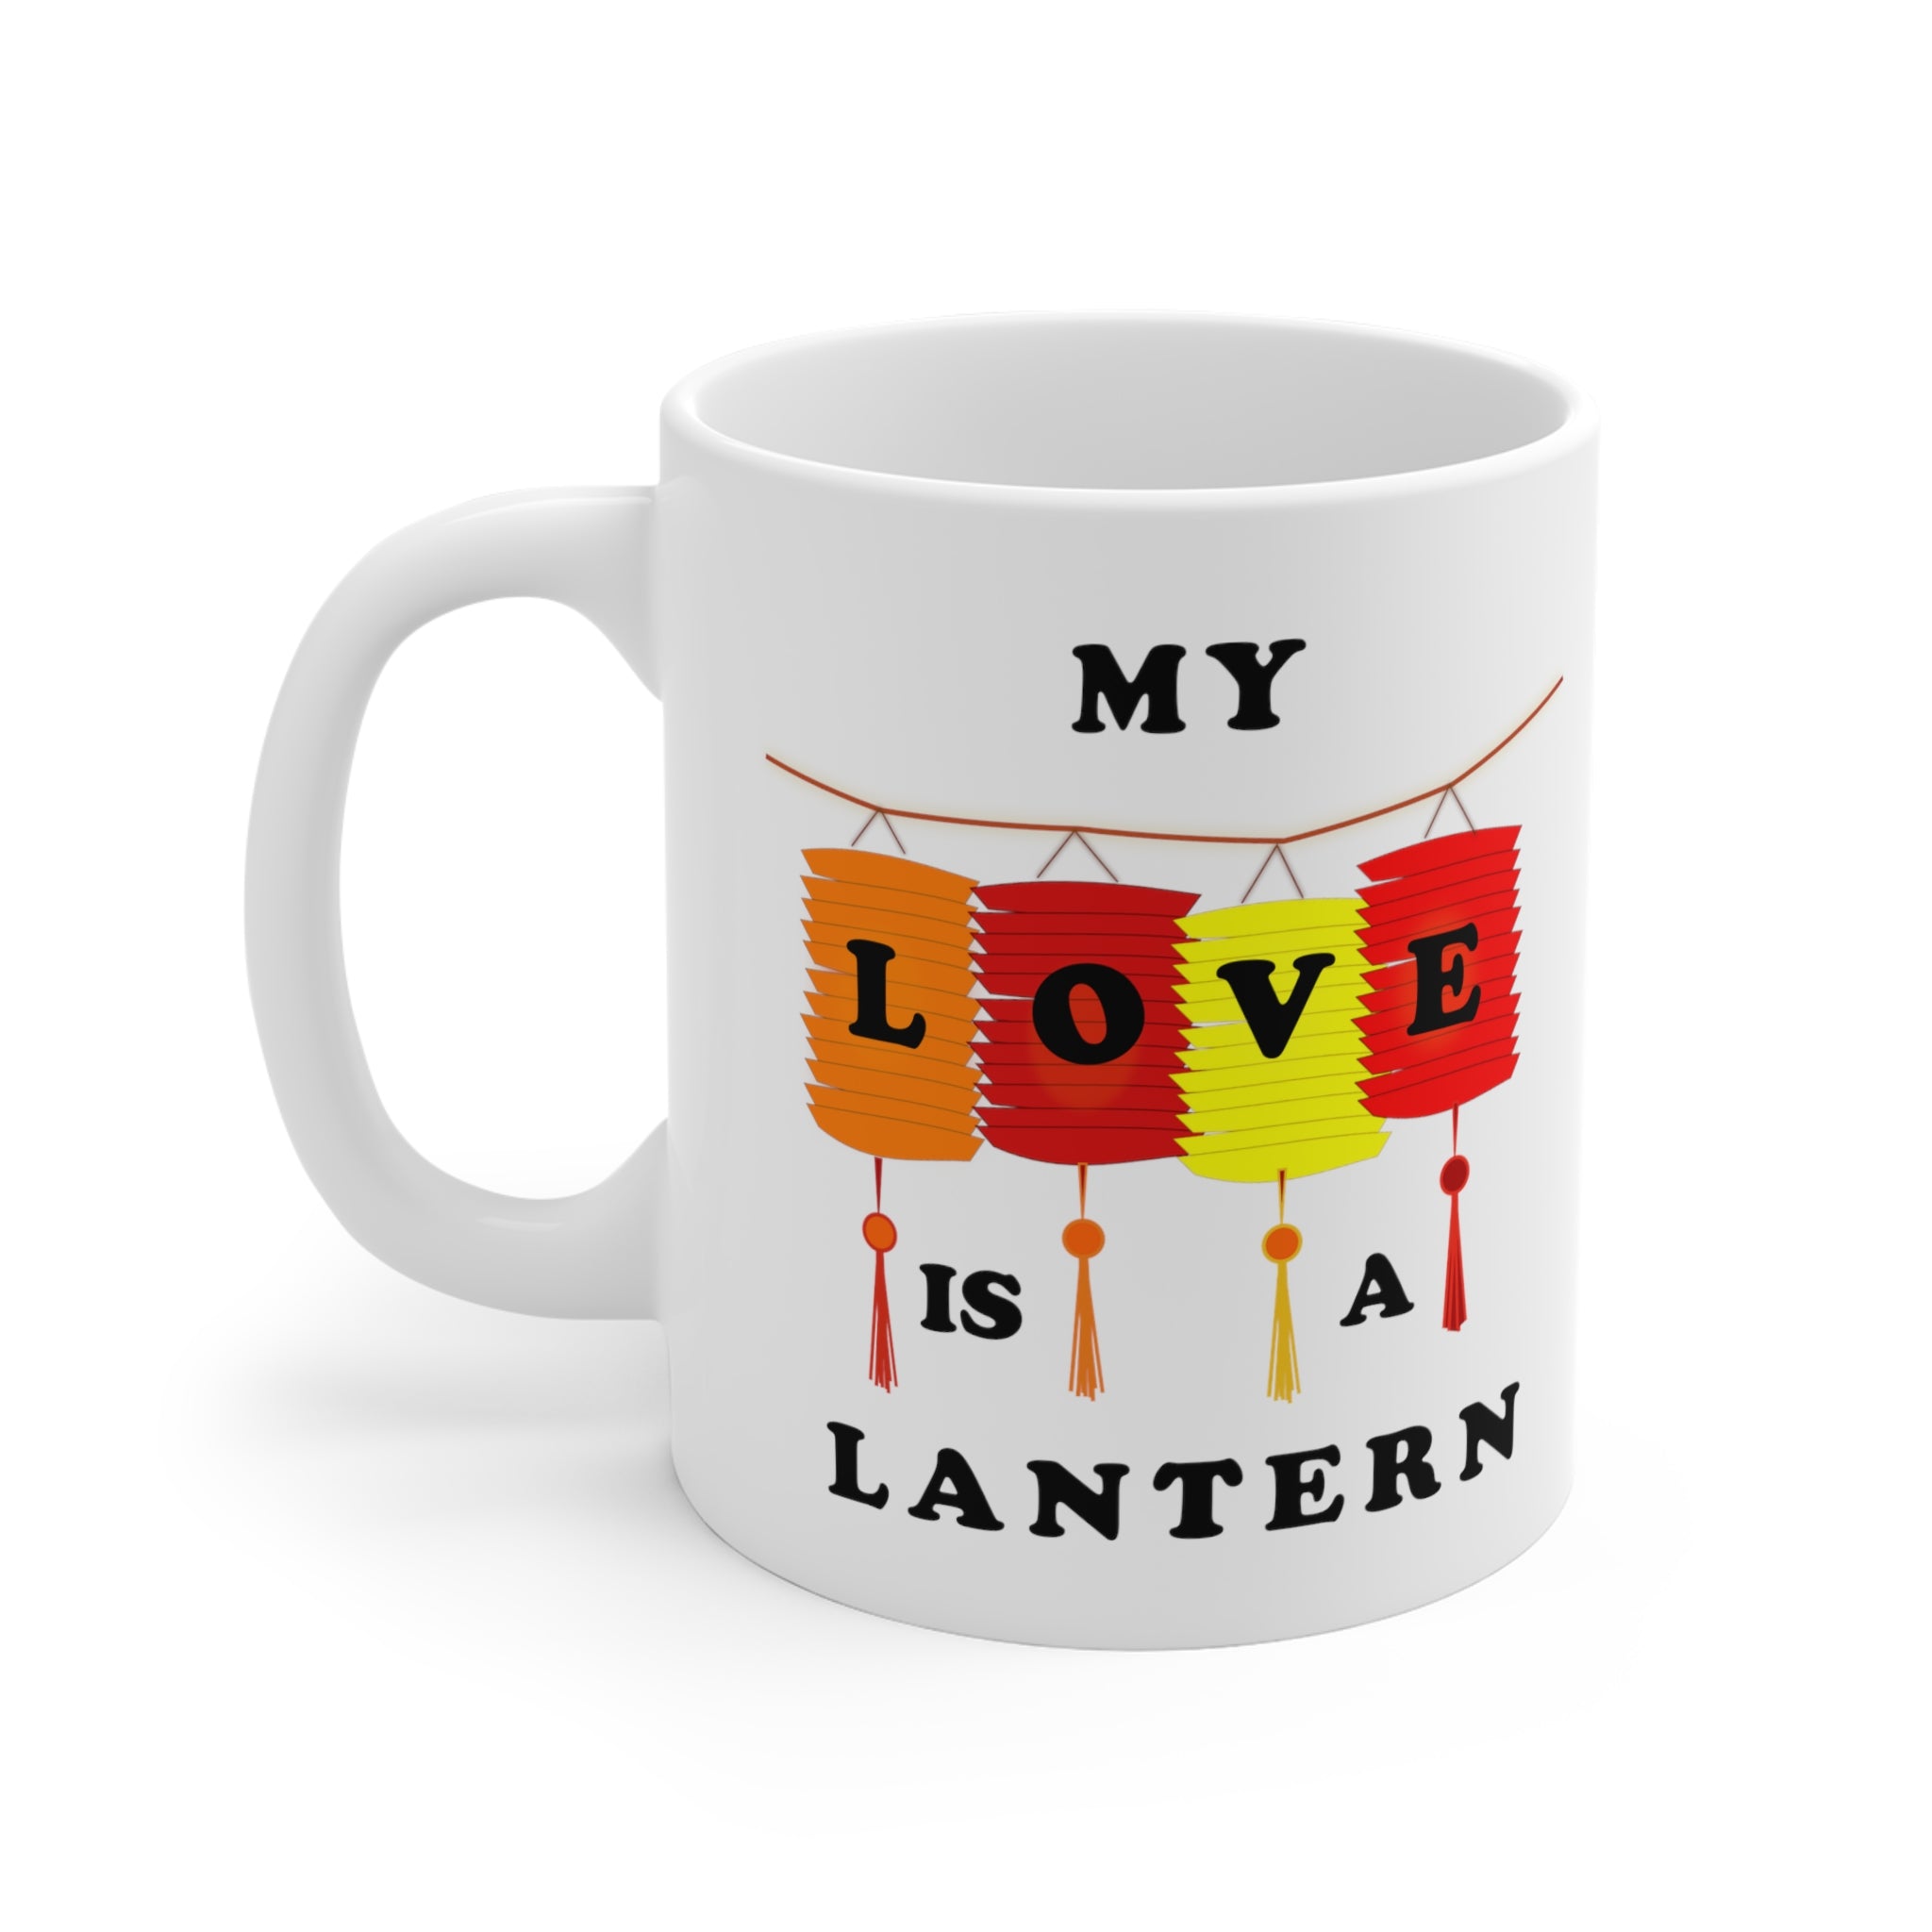 11oz white ceramic mug featuring Chines lanterns and the caption 'my love is a lantern'